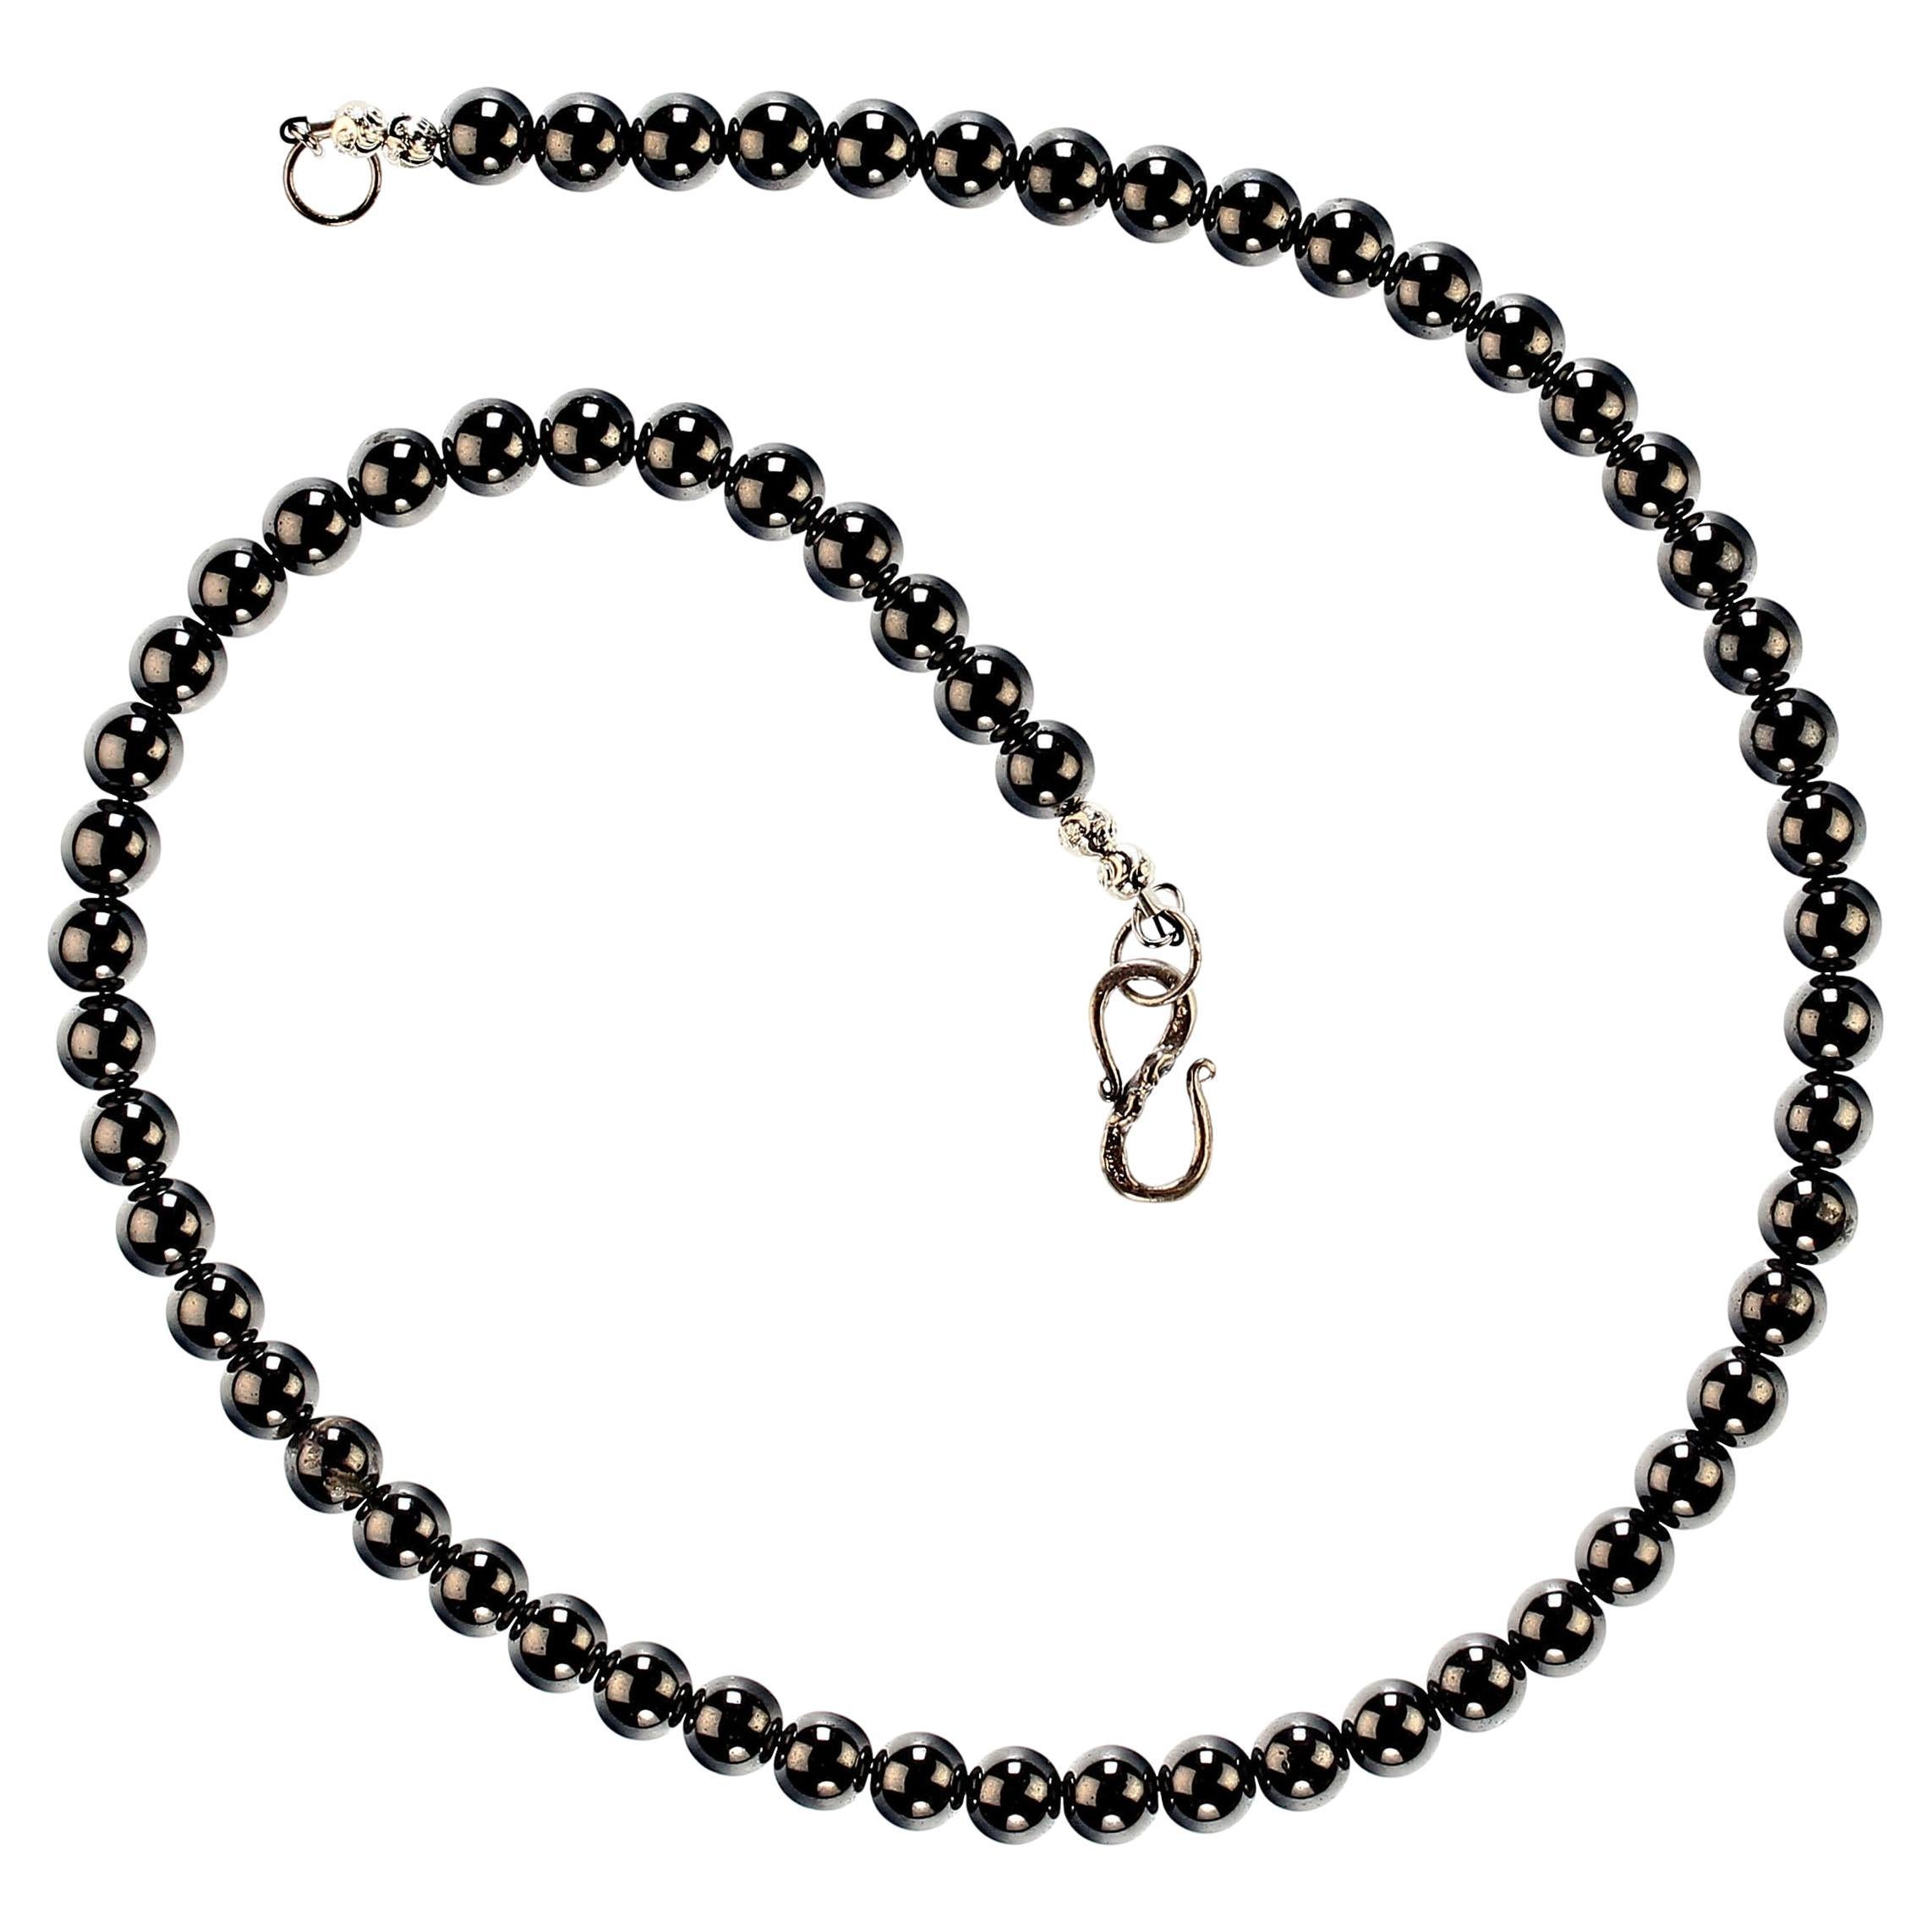 18-Inch hematite necklace with silver 'S' hook clasp.  The traditional necklace of smooth round 7MM hematite is a pleasure to wear.  Hematite is an iron oxide which polishes to bright shiny gray.  It is thought to help with stress and anxiety